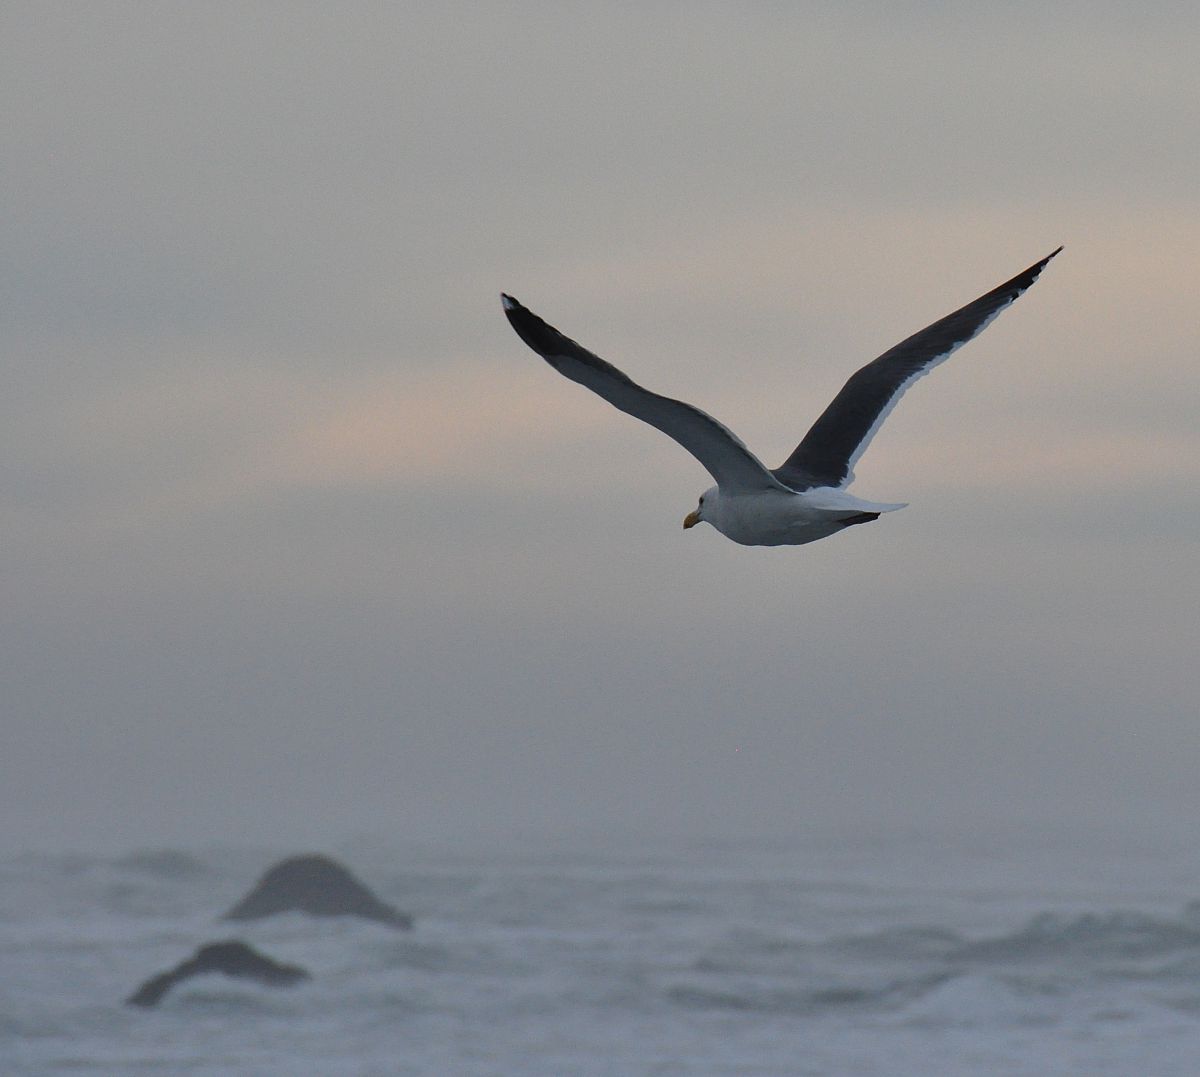 Gull - from the Bandon Thanksgiving 2011 photo gallery.